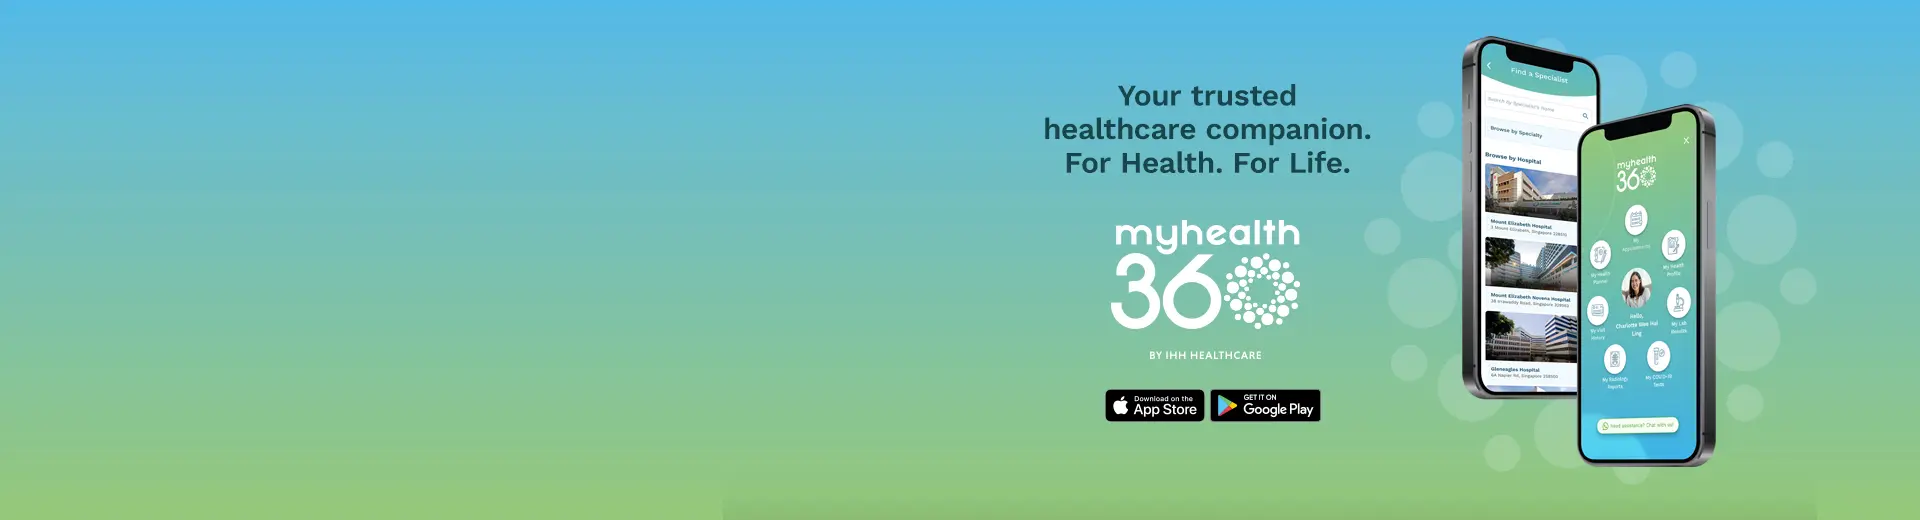 MyHealth360. For Health. For Life.